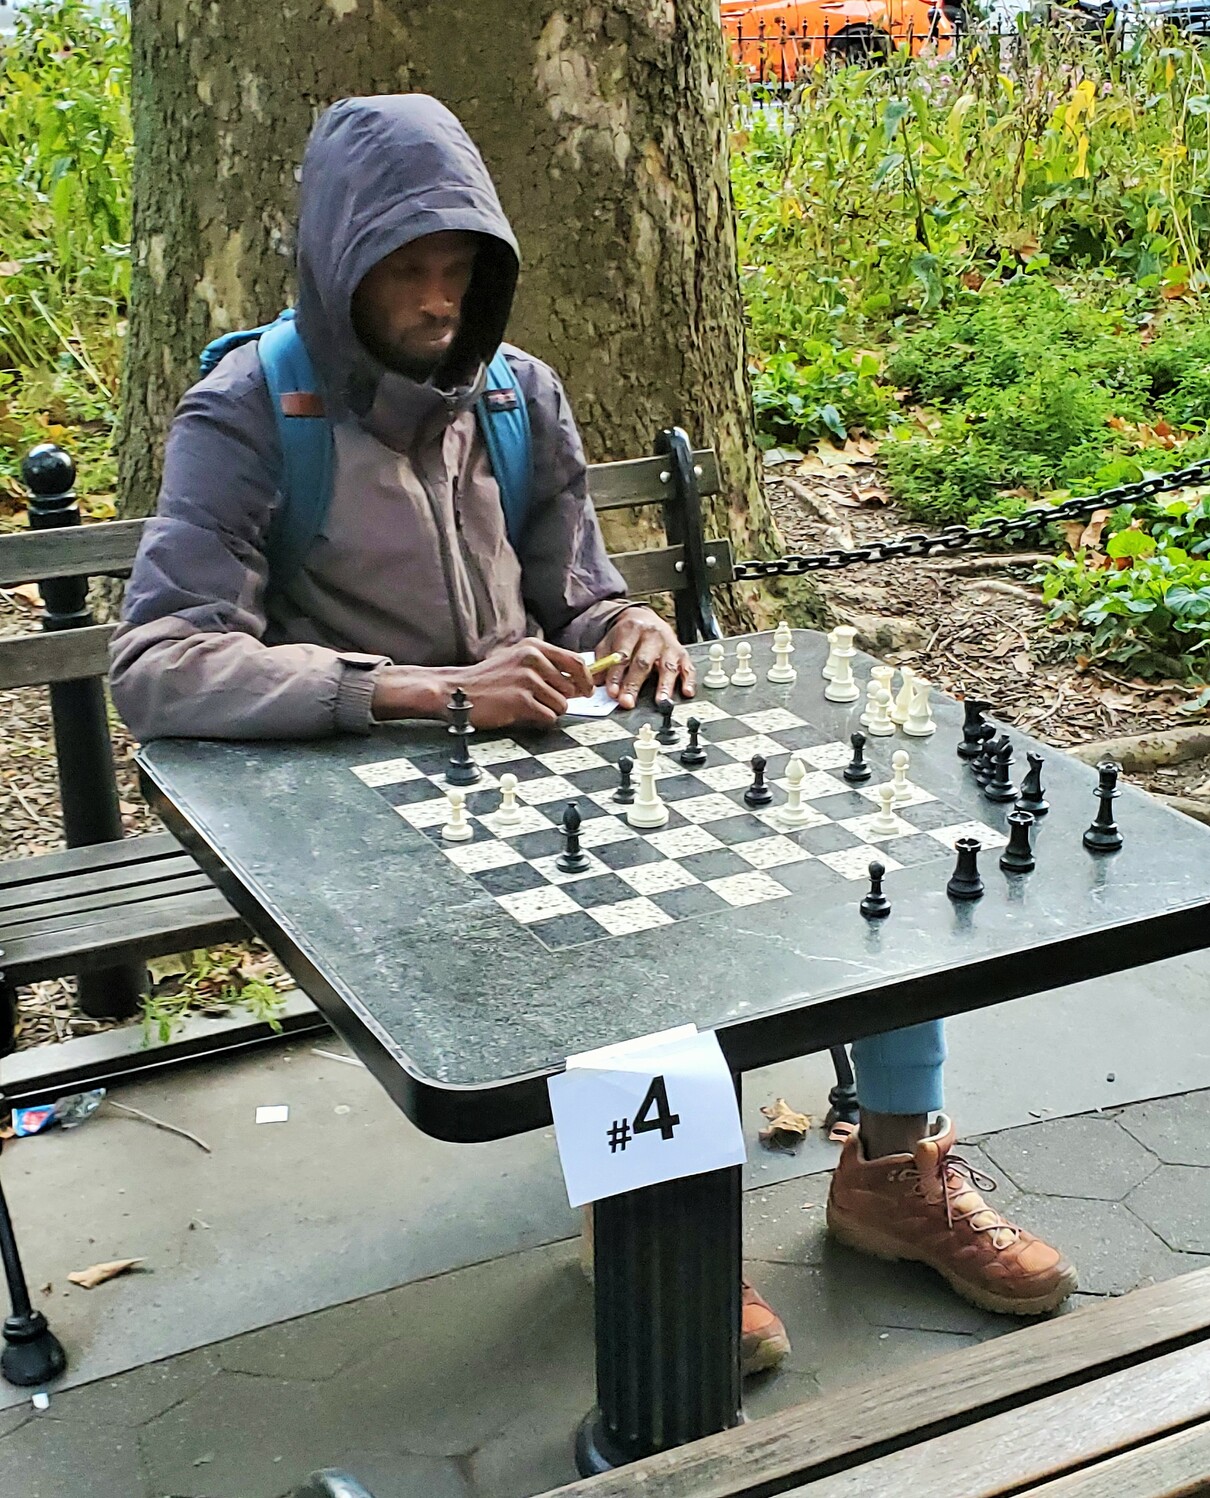 Kickboxer likes to frequent parks to play chess games and stare